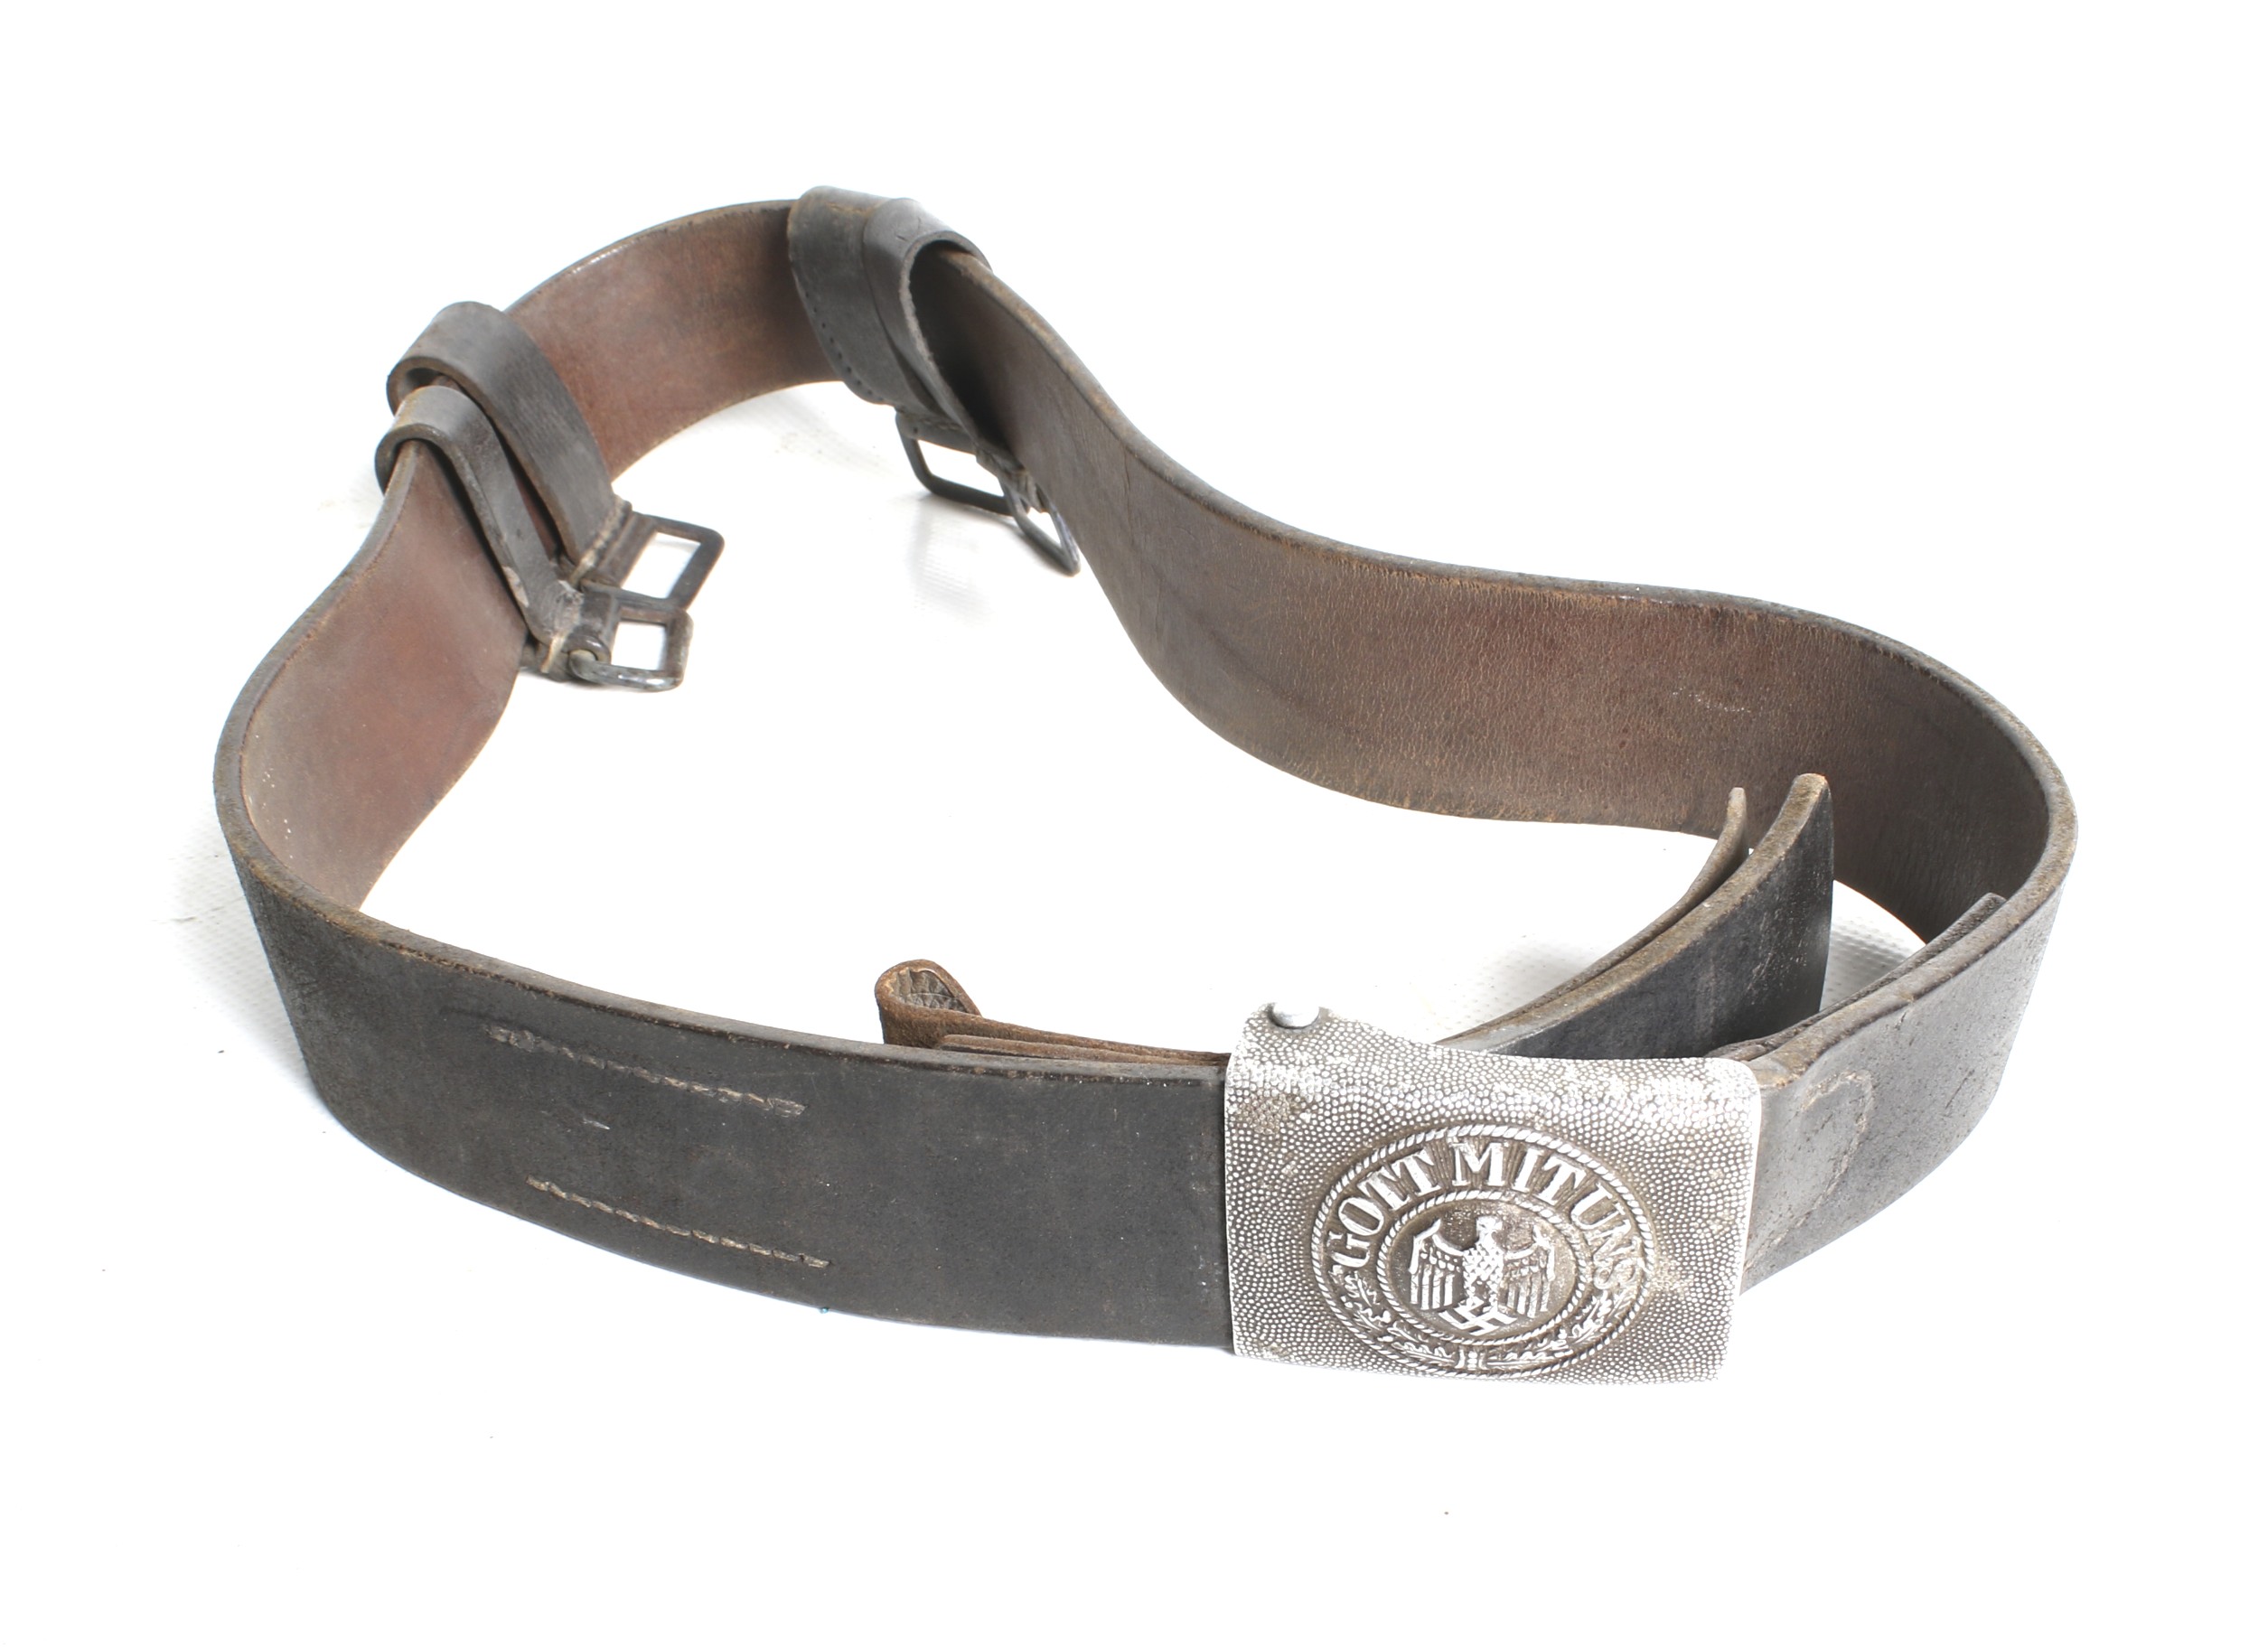 A WWII German army leather belt and buckle and a water bottle. - Image 2 of 5